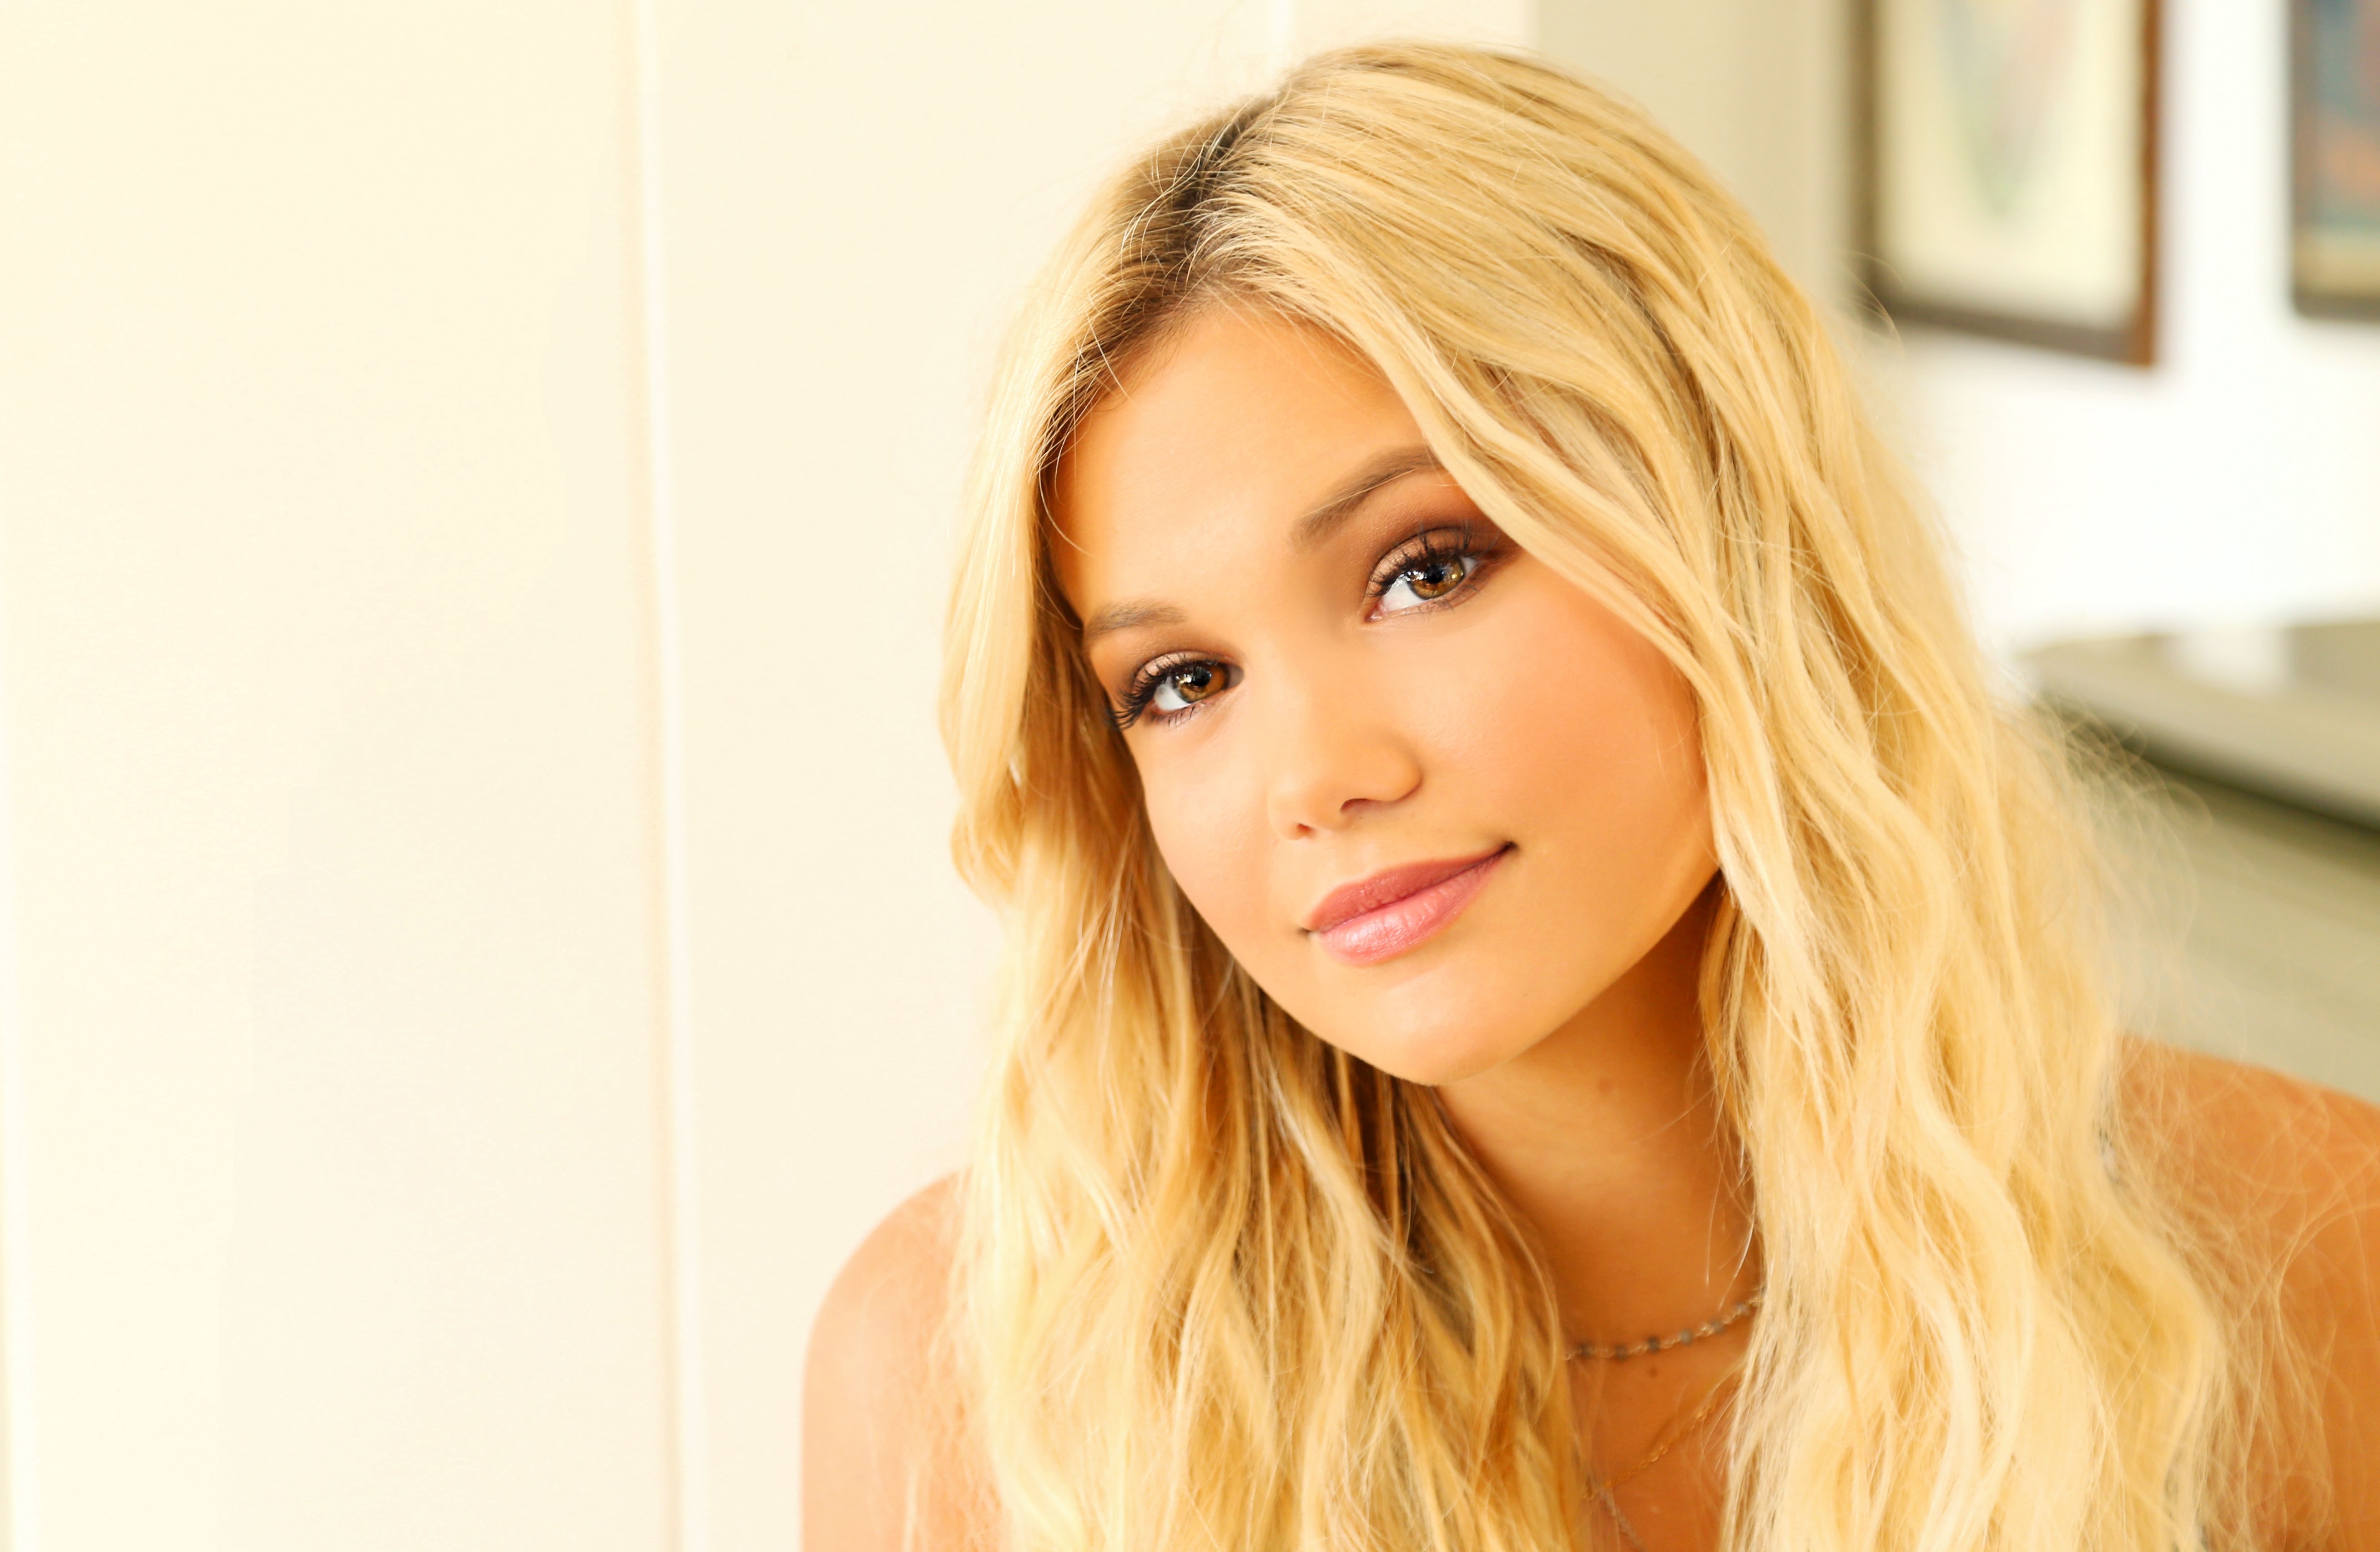 43 Facts about Olivia Holt - Facts.net